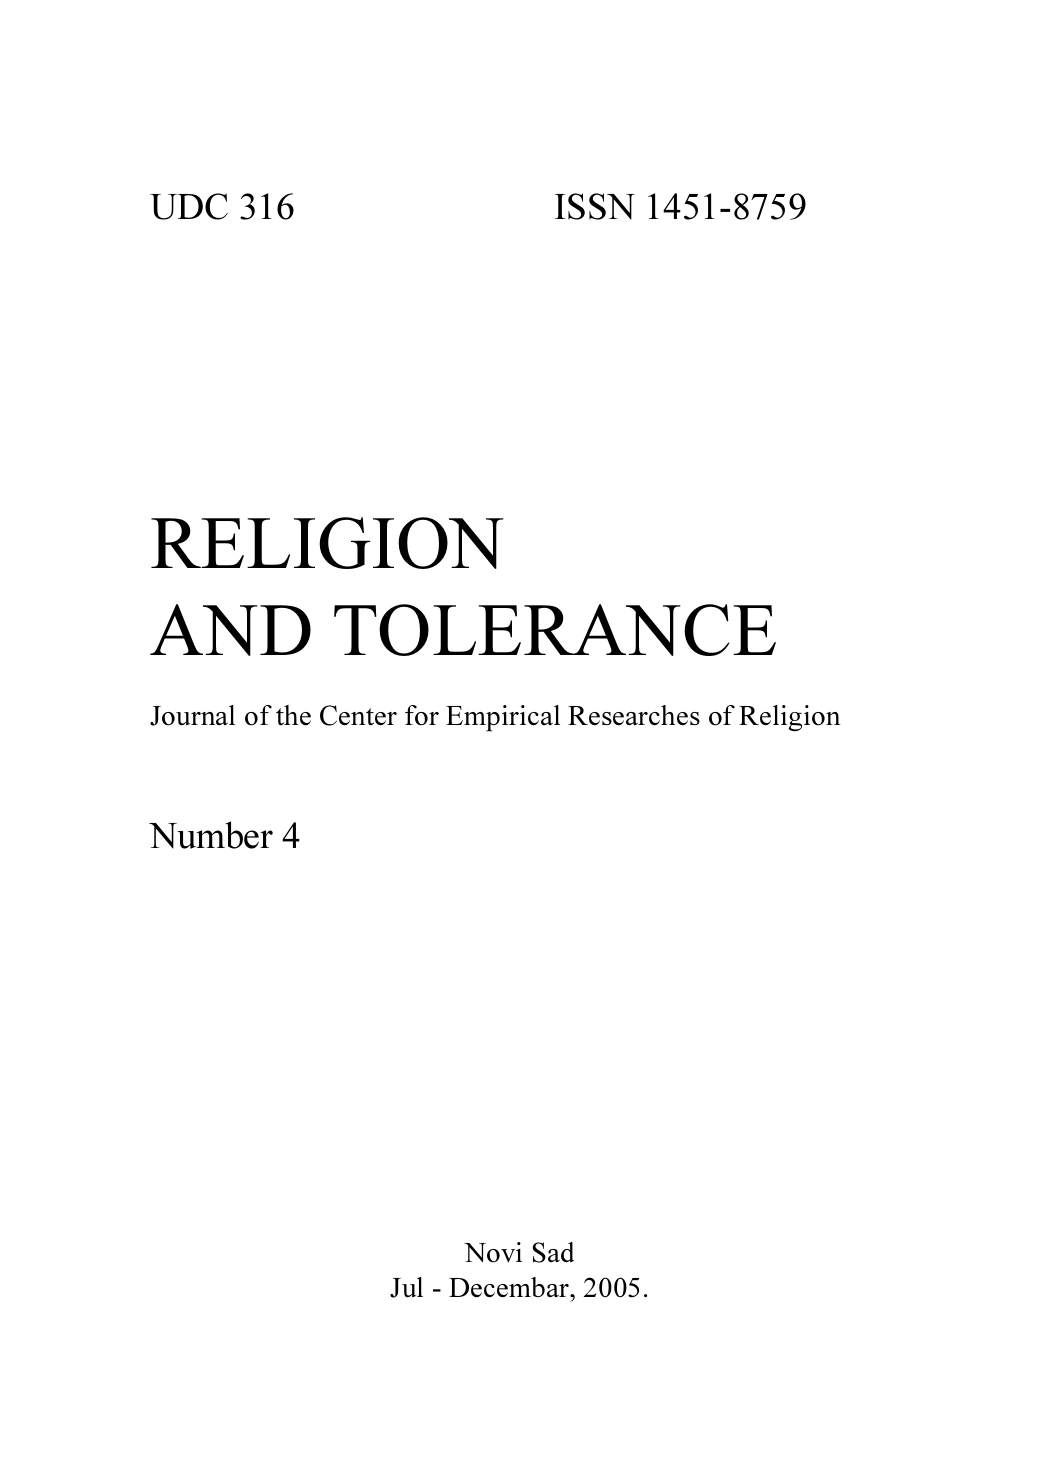 ORTHODOX CHURCH AND TOLERANCE Cover Image